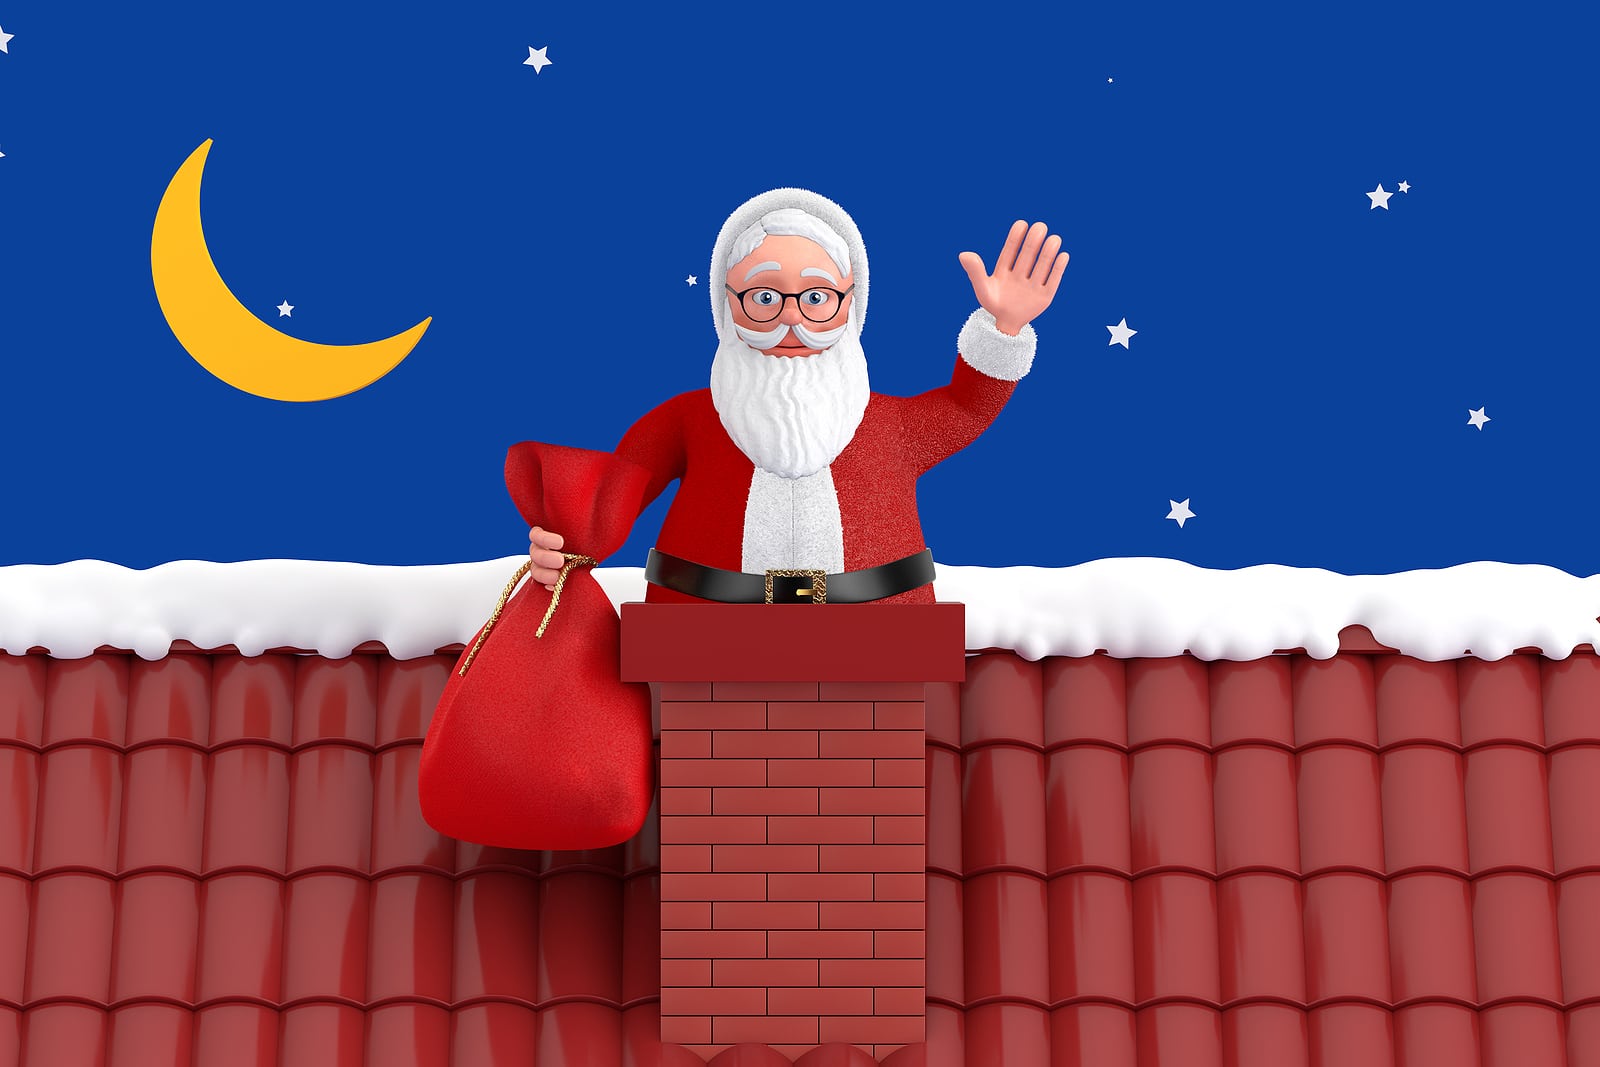 How To Get Your Roof in Tip-Top Shape for Santa